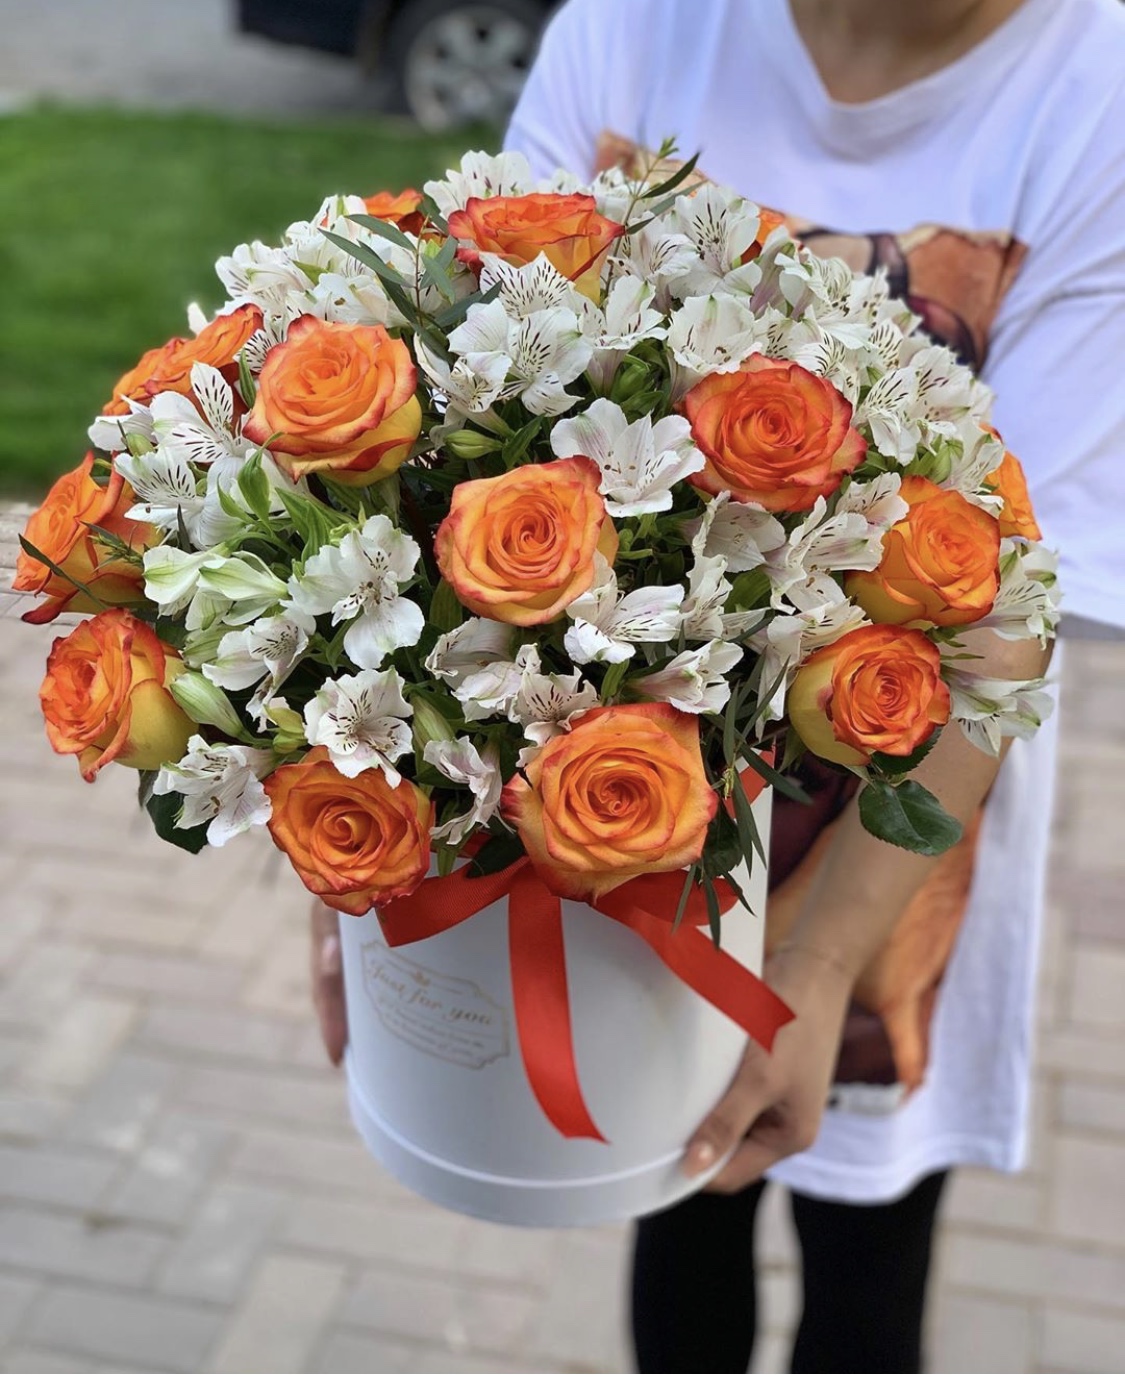 Just for you: Flowers arrangements